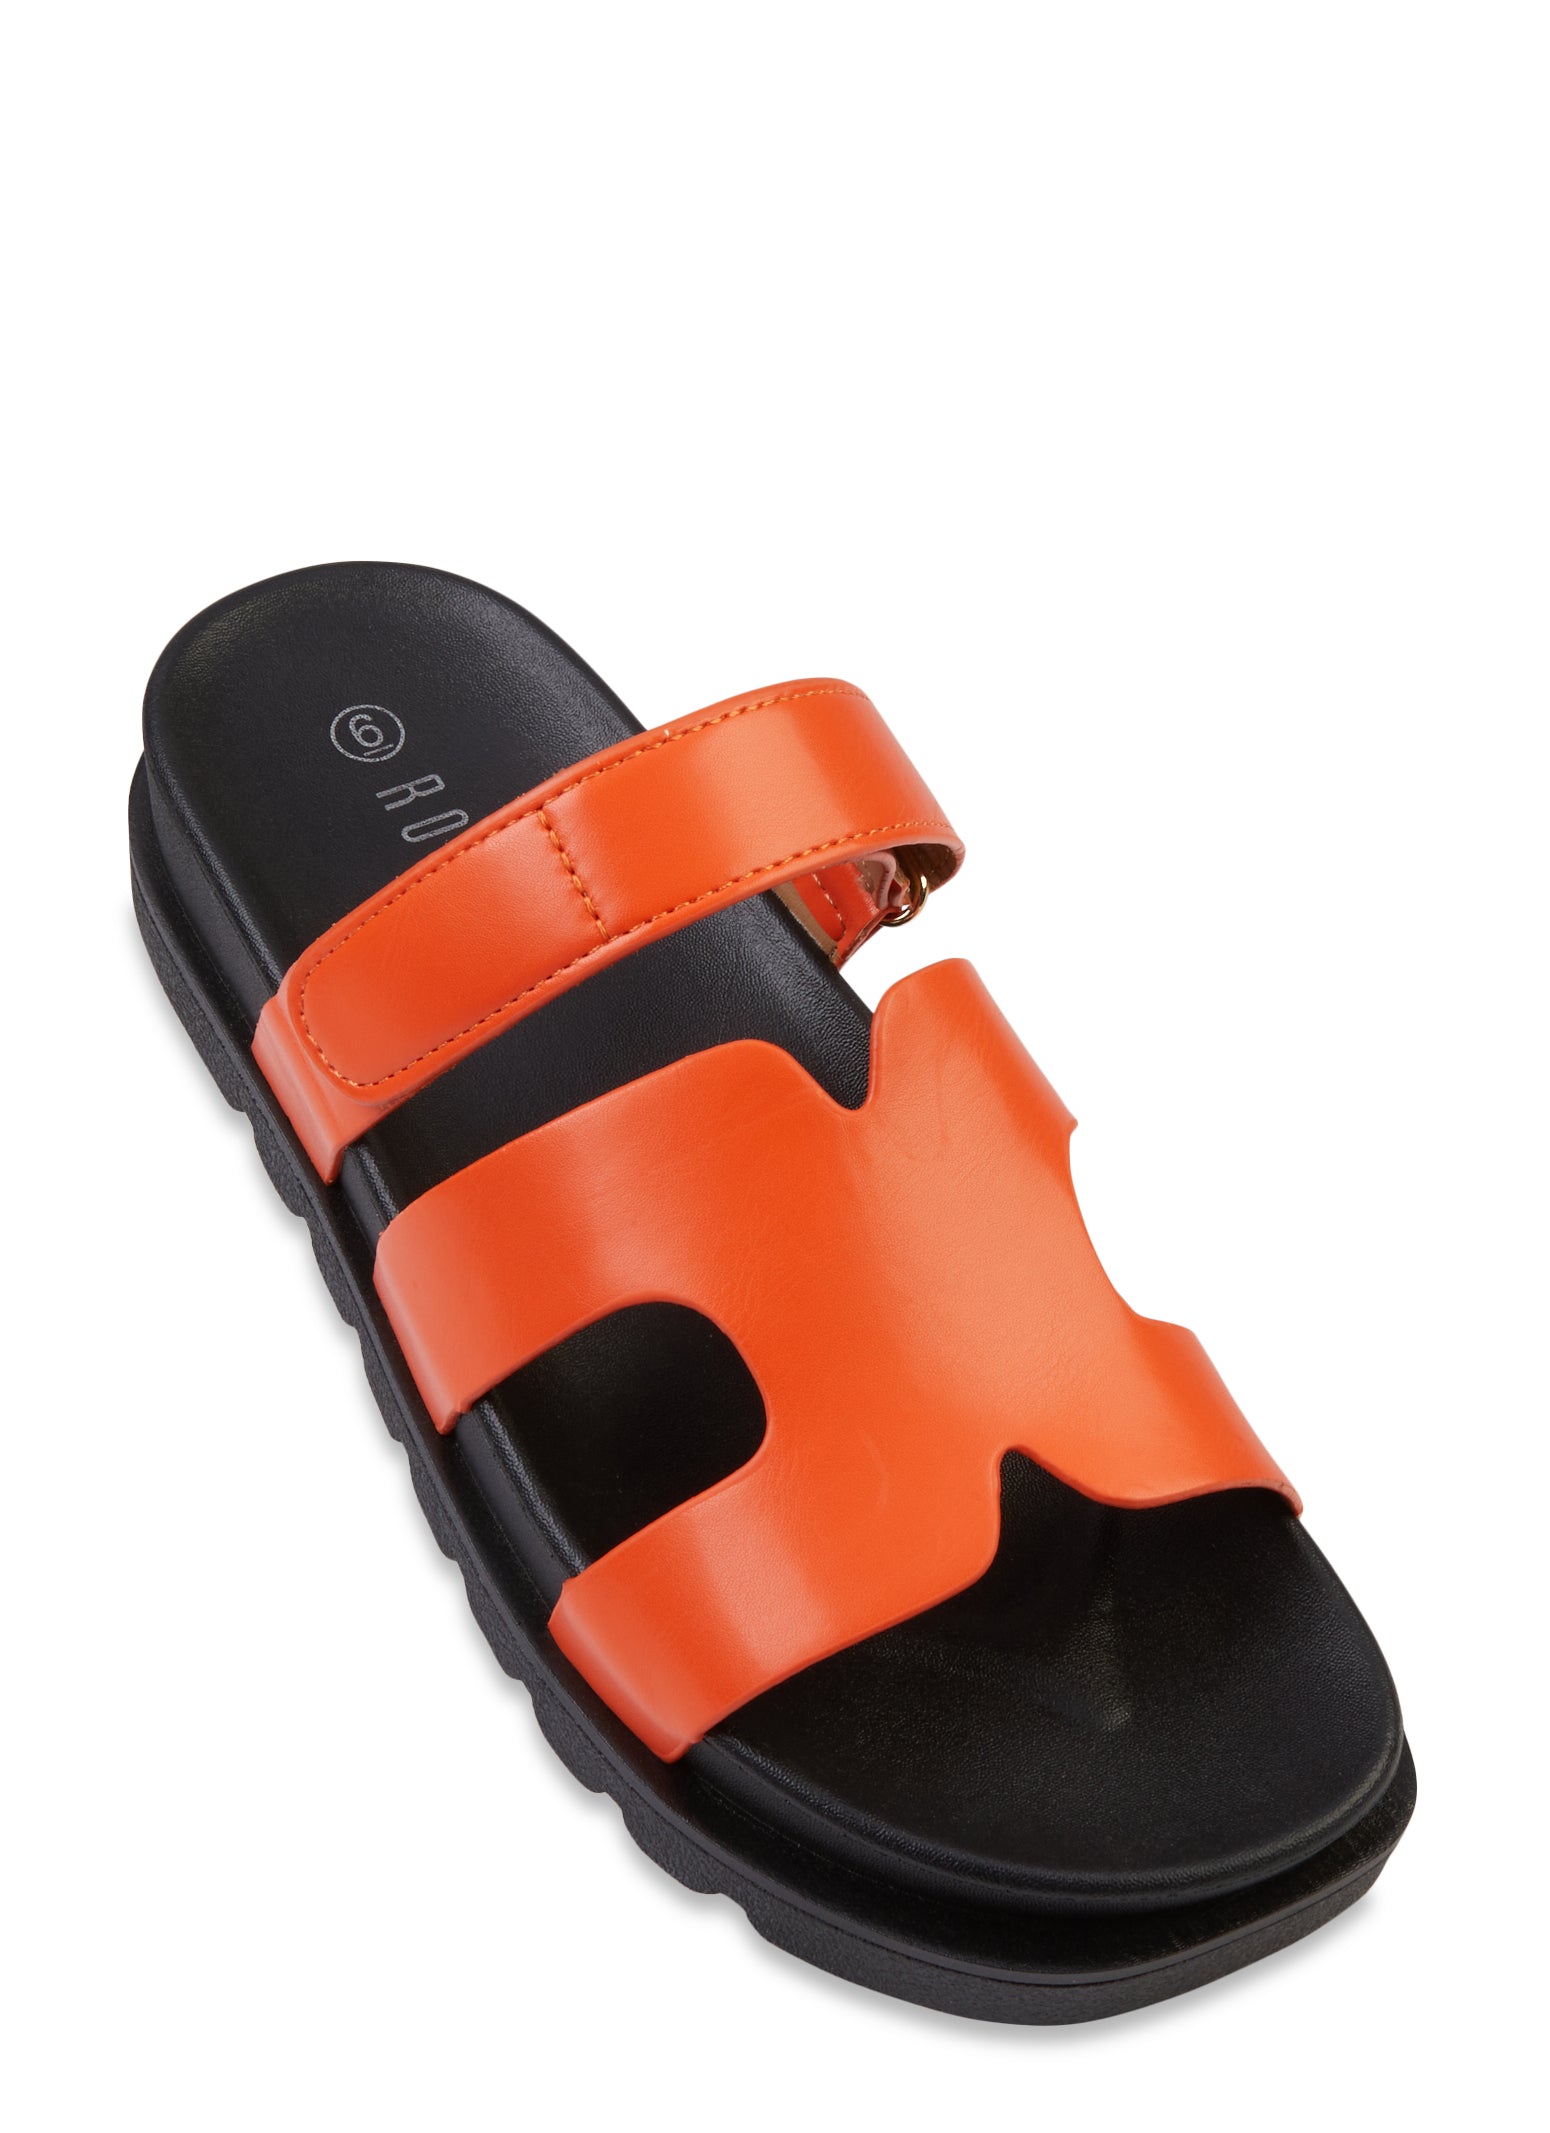 Marni Women's flat sandals in tan leather and black fur with gold and orange  details - Italian Boutique